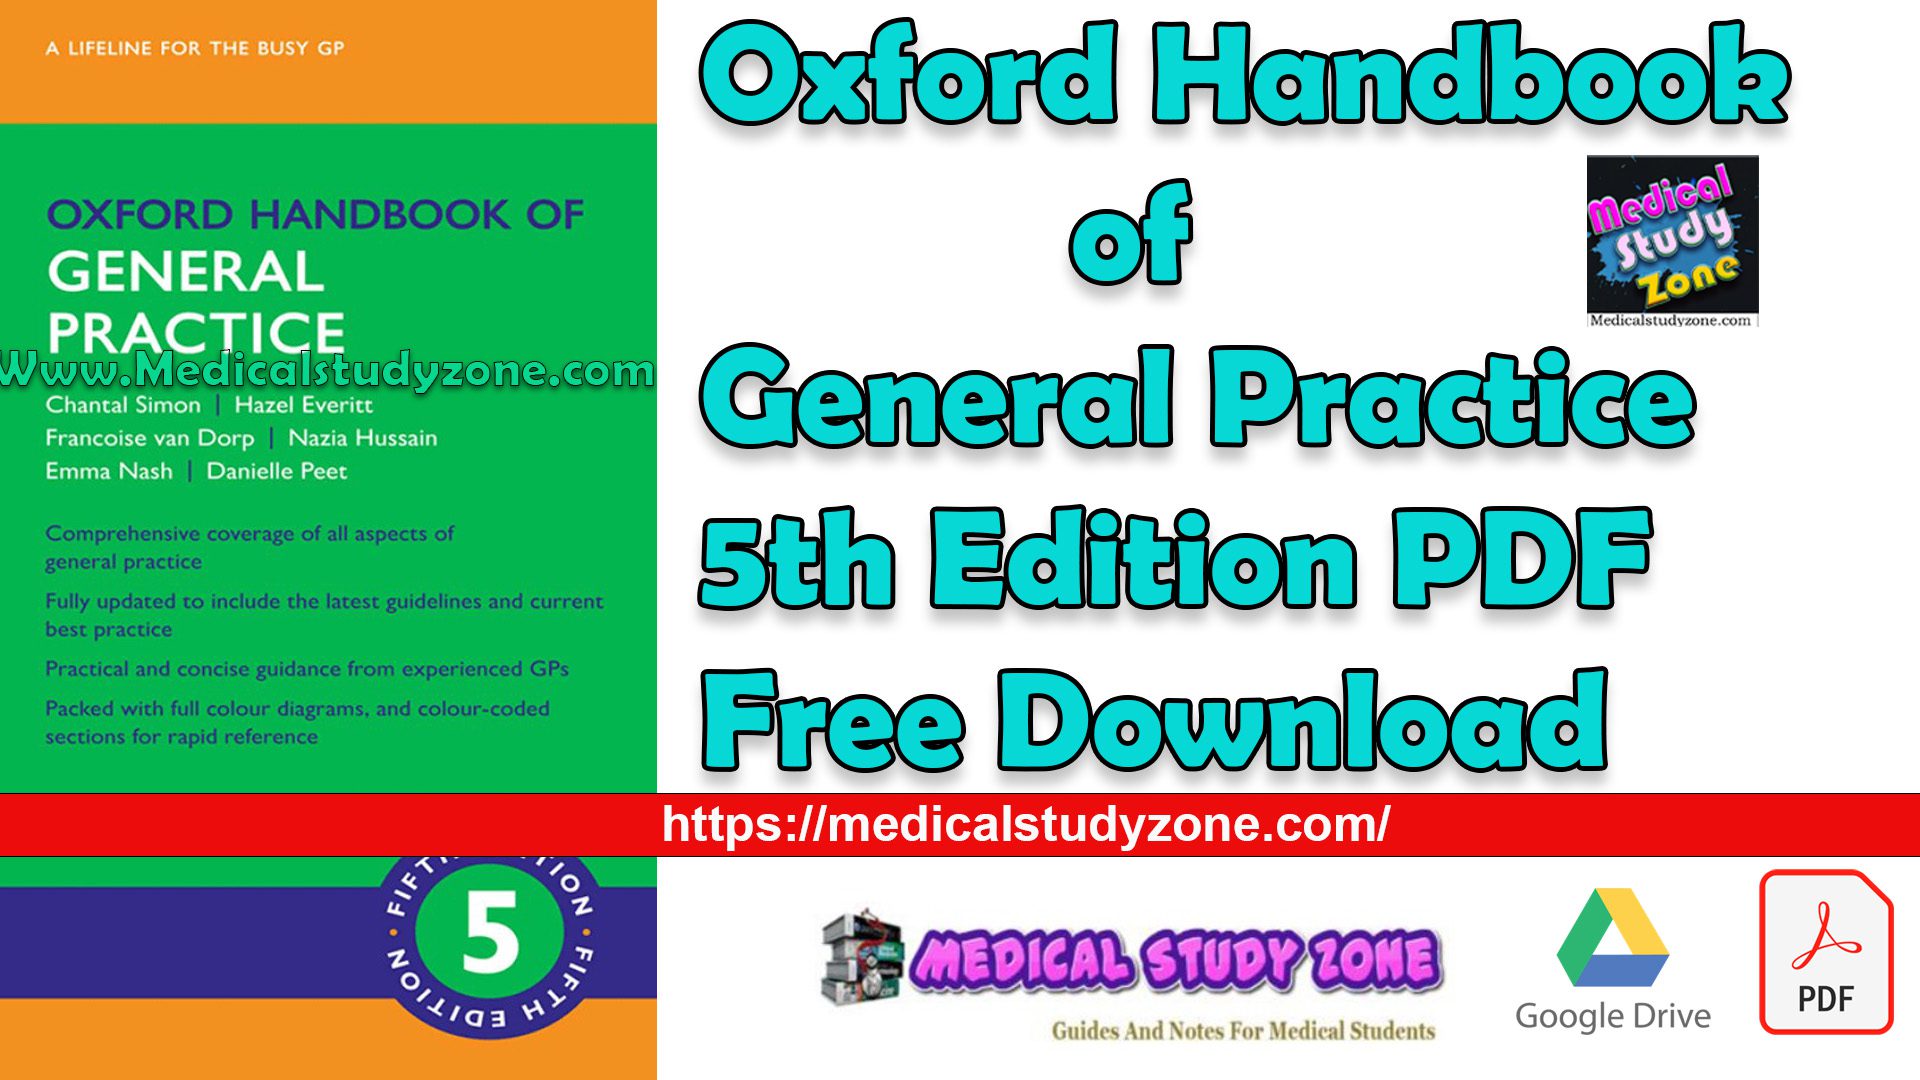 Oxford Handbook of General Practice 5th Edition PDF Free Download